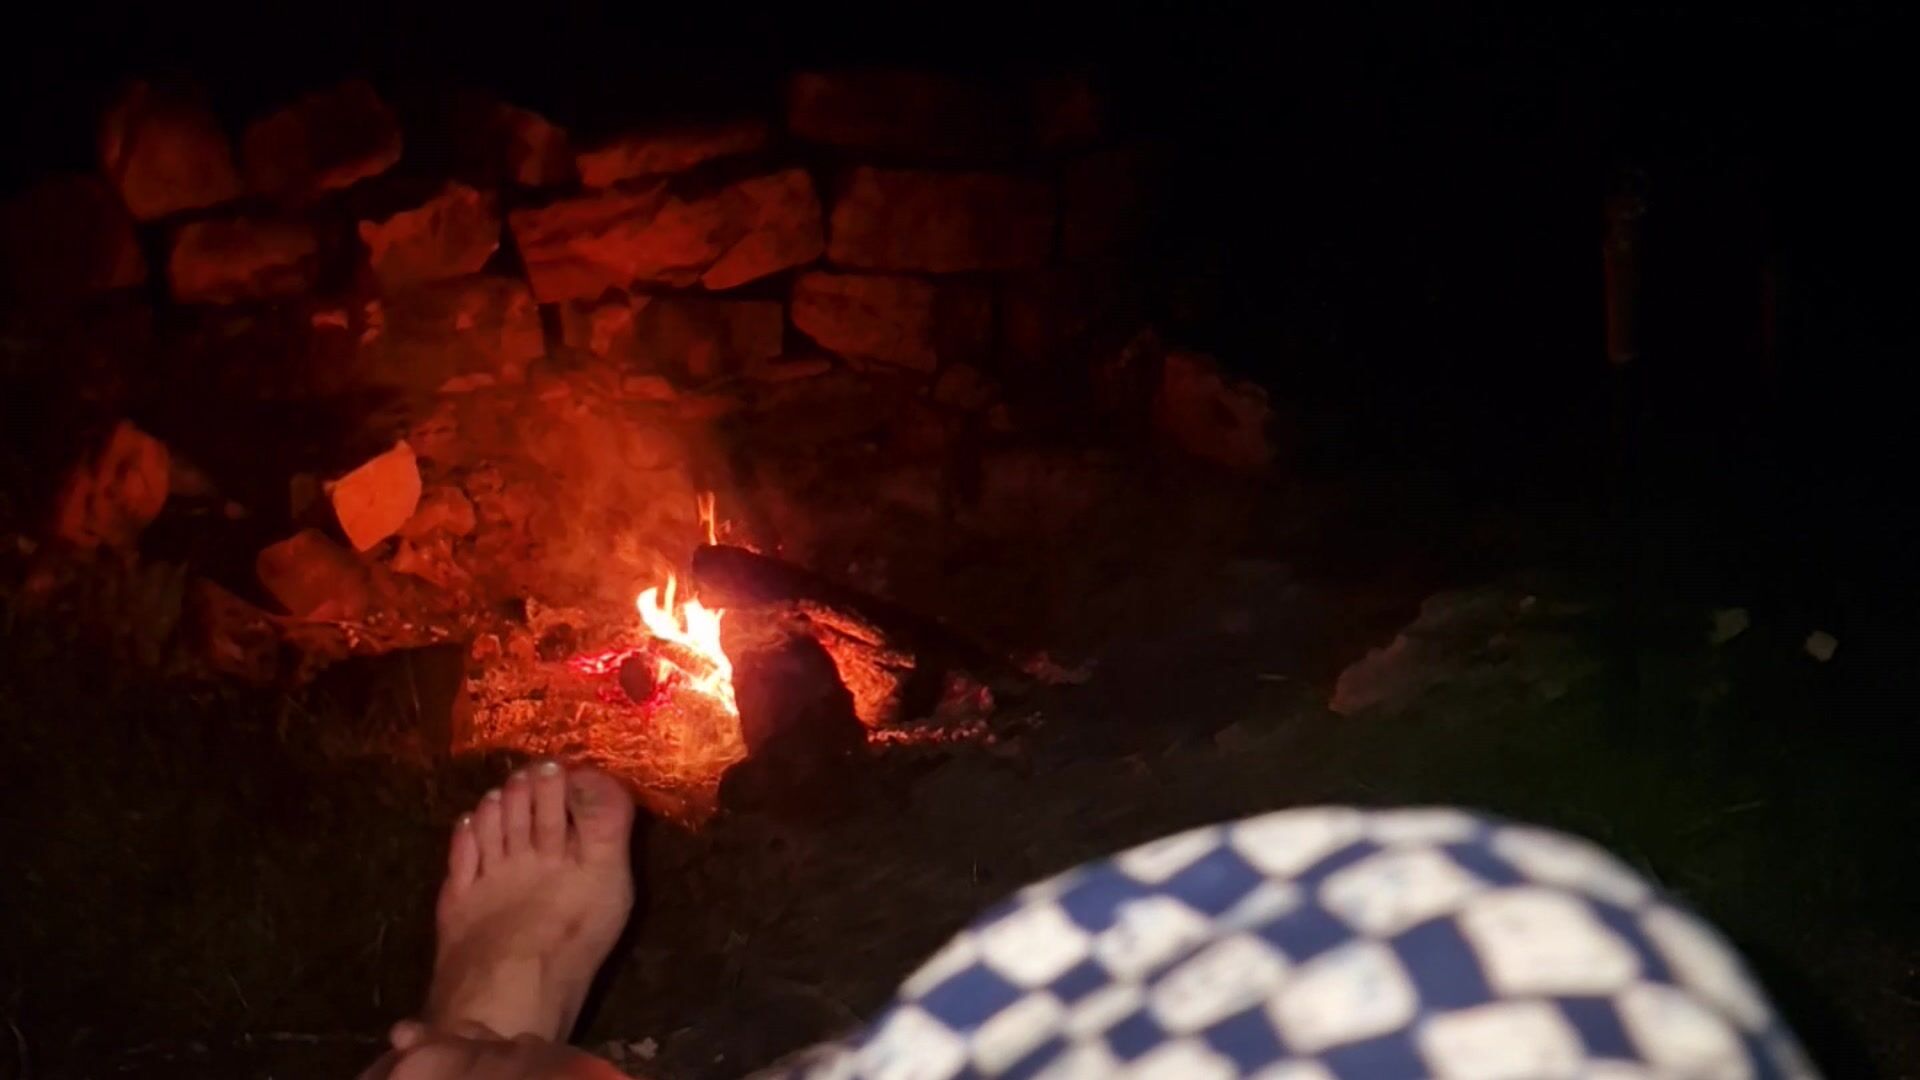 Warming my feet at a fire outside